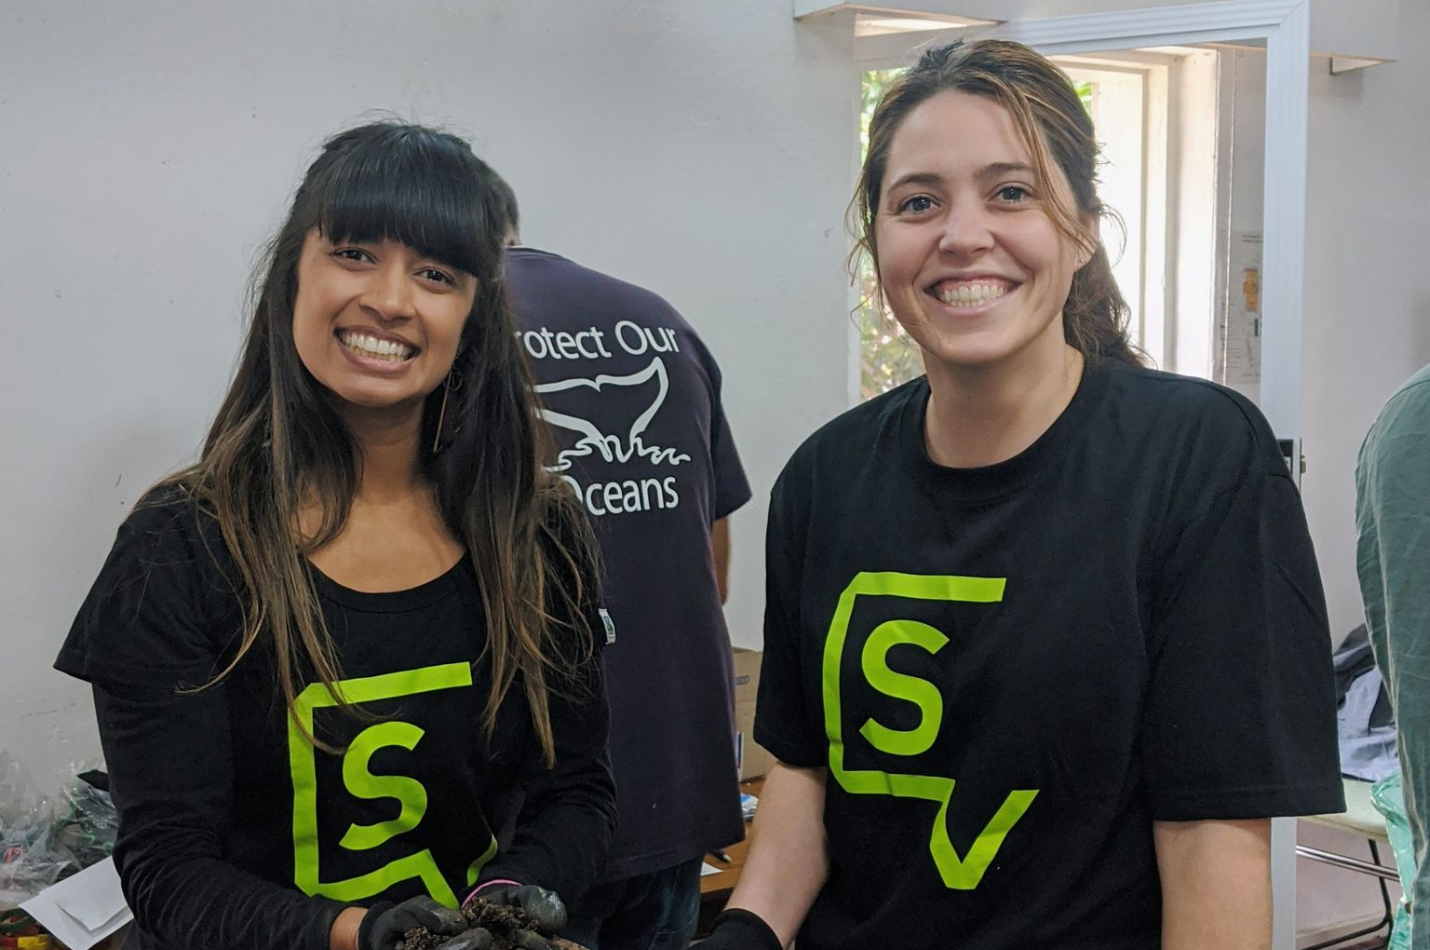 Two young women stand side by side, smiling at the camera. The girl on the left has dark hair and a fringe. The girl on the right has brown hair in a ponytail. Both wear black t-shirts with a light green logo in the centre.